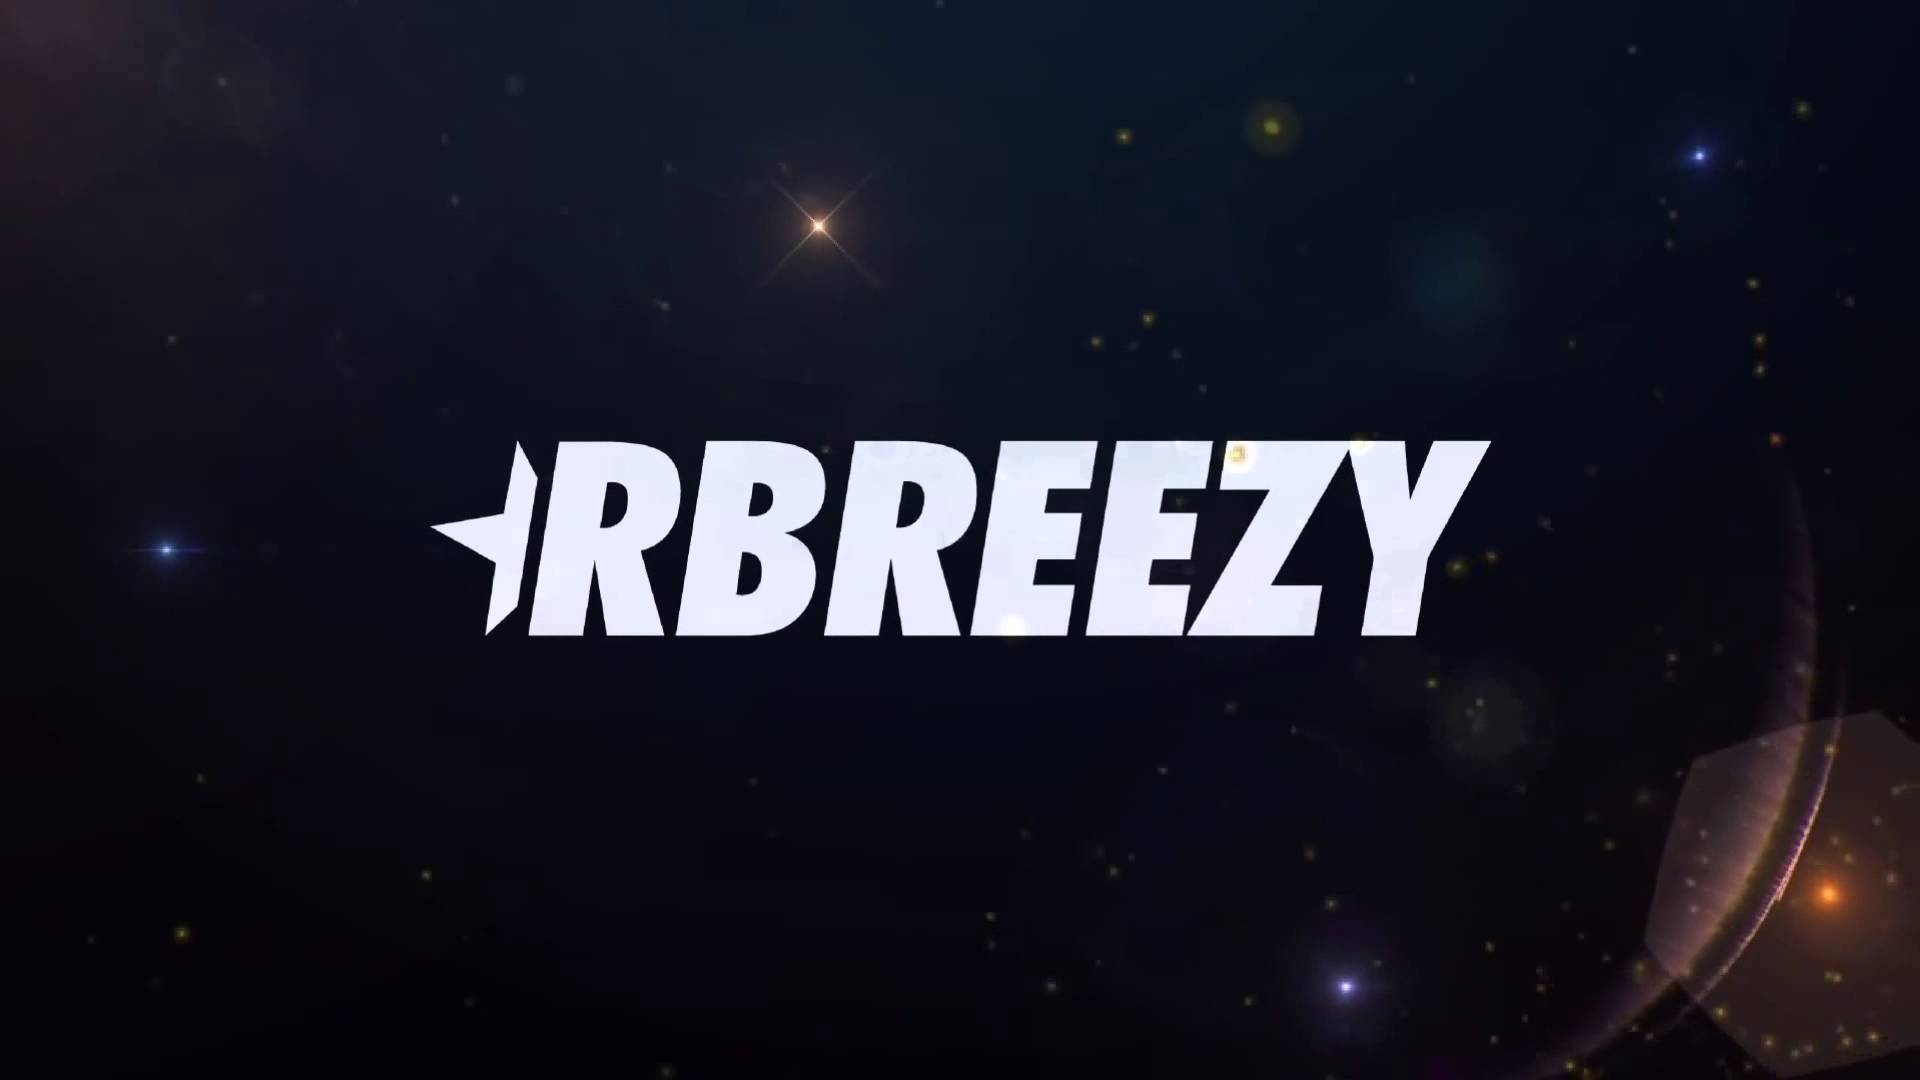 The Ntc Is Pretty Much Powerless Against Rbreezy R Breezy Font